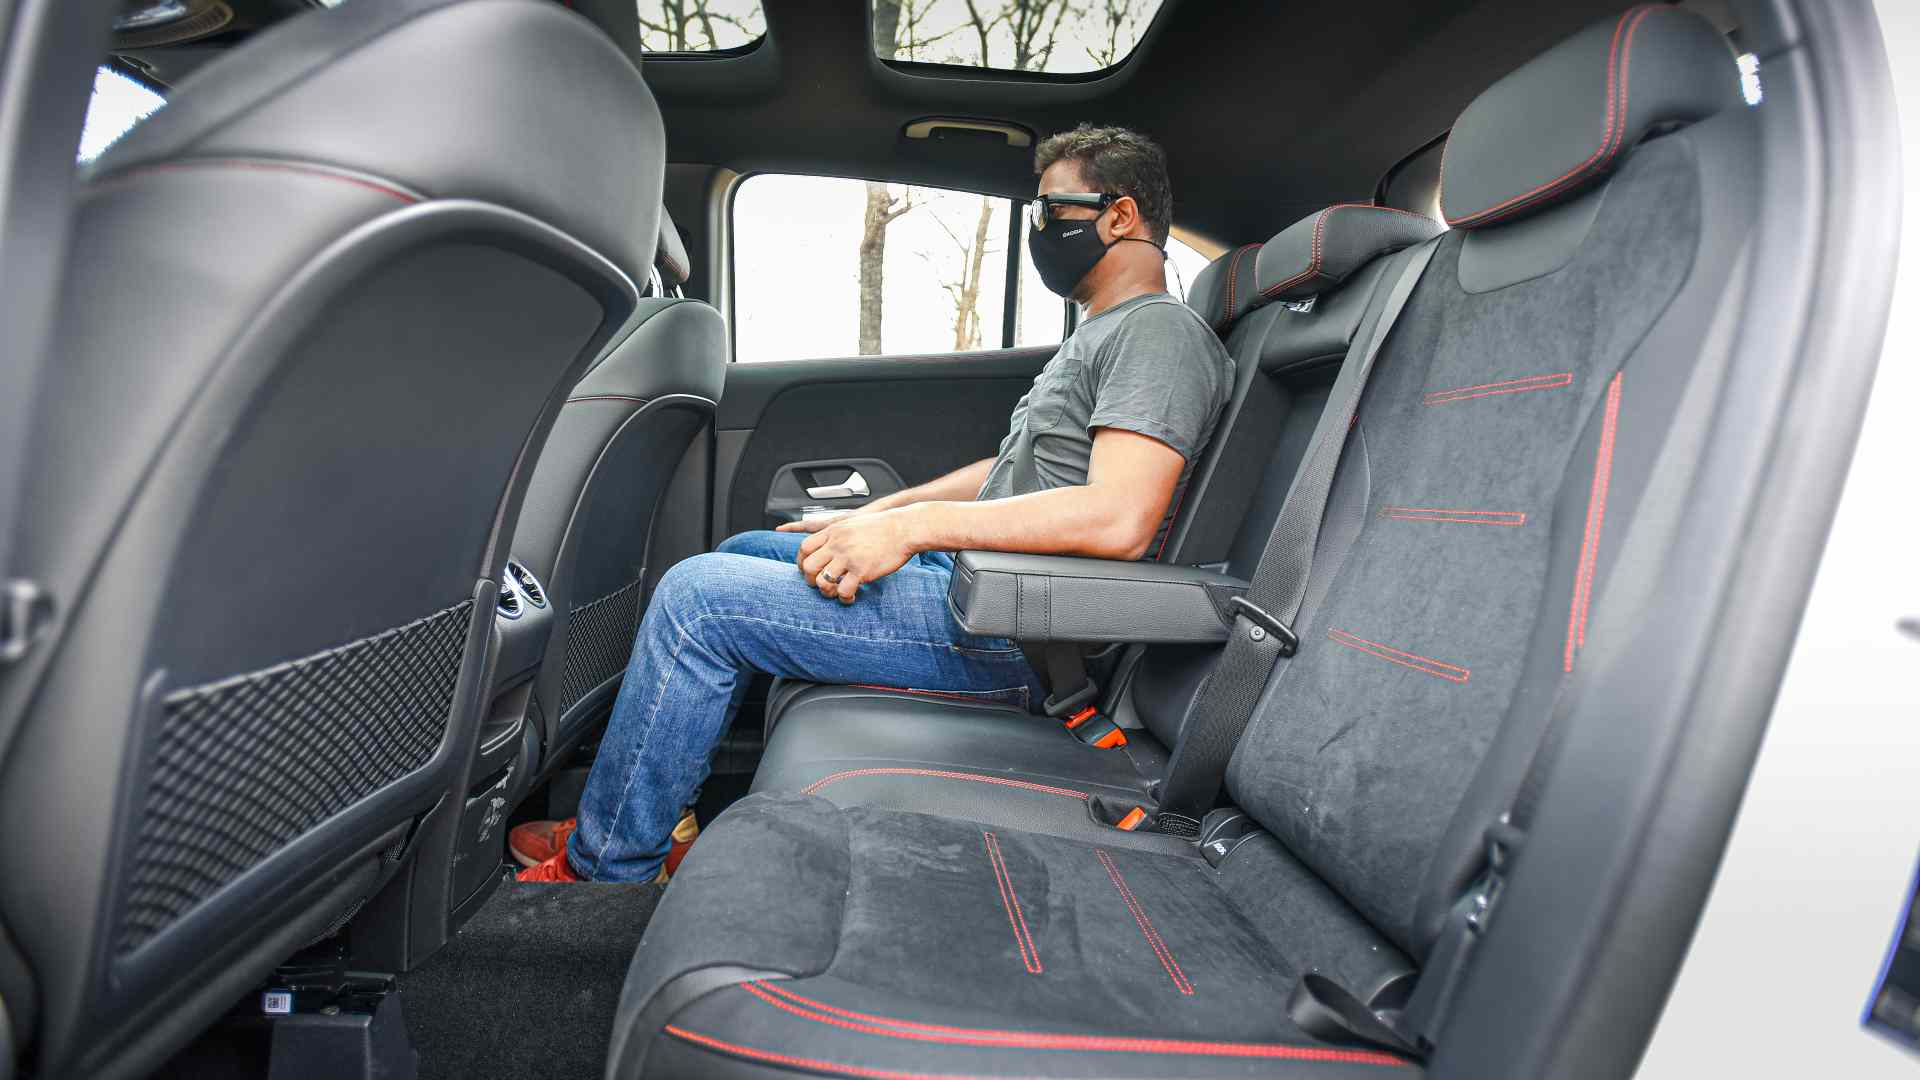 Rear-seat space is not a strength of the new GLA. Image: Overdrive/Anis Shaikh